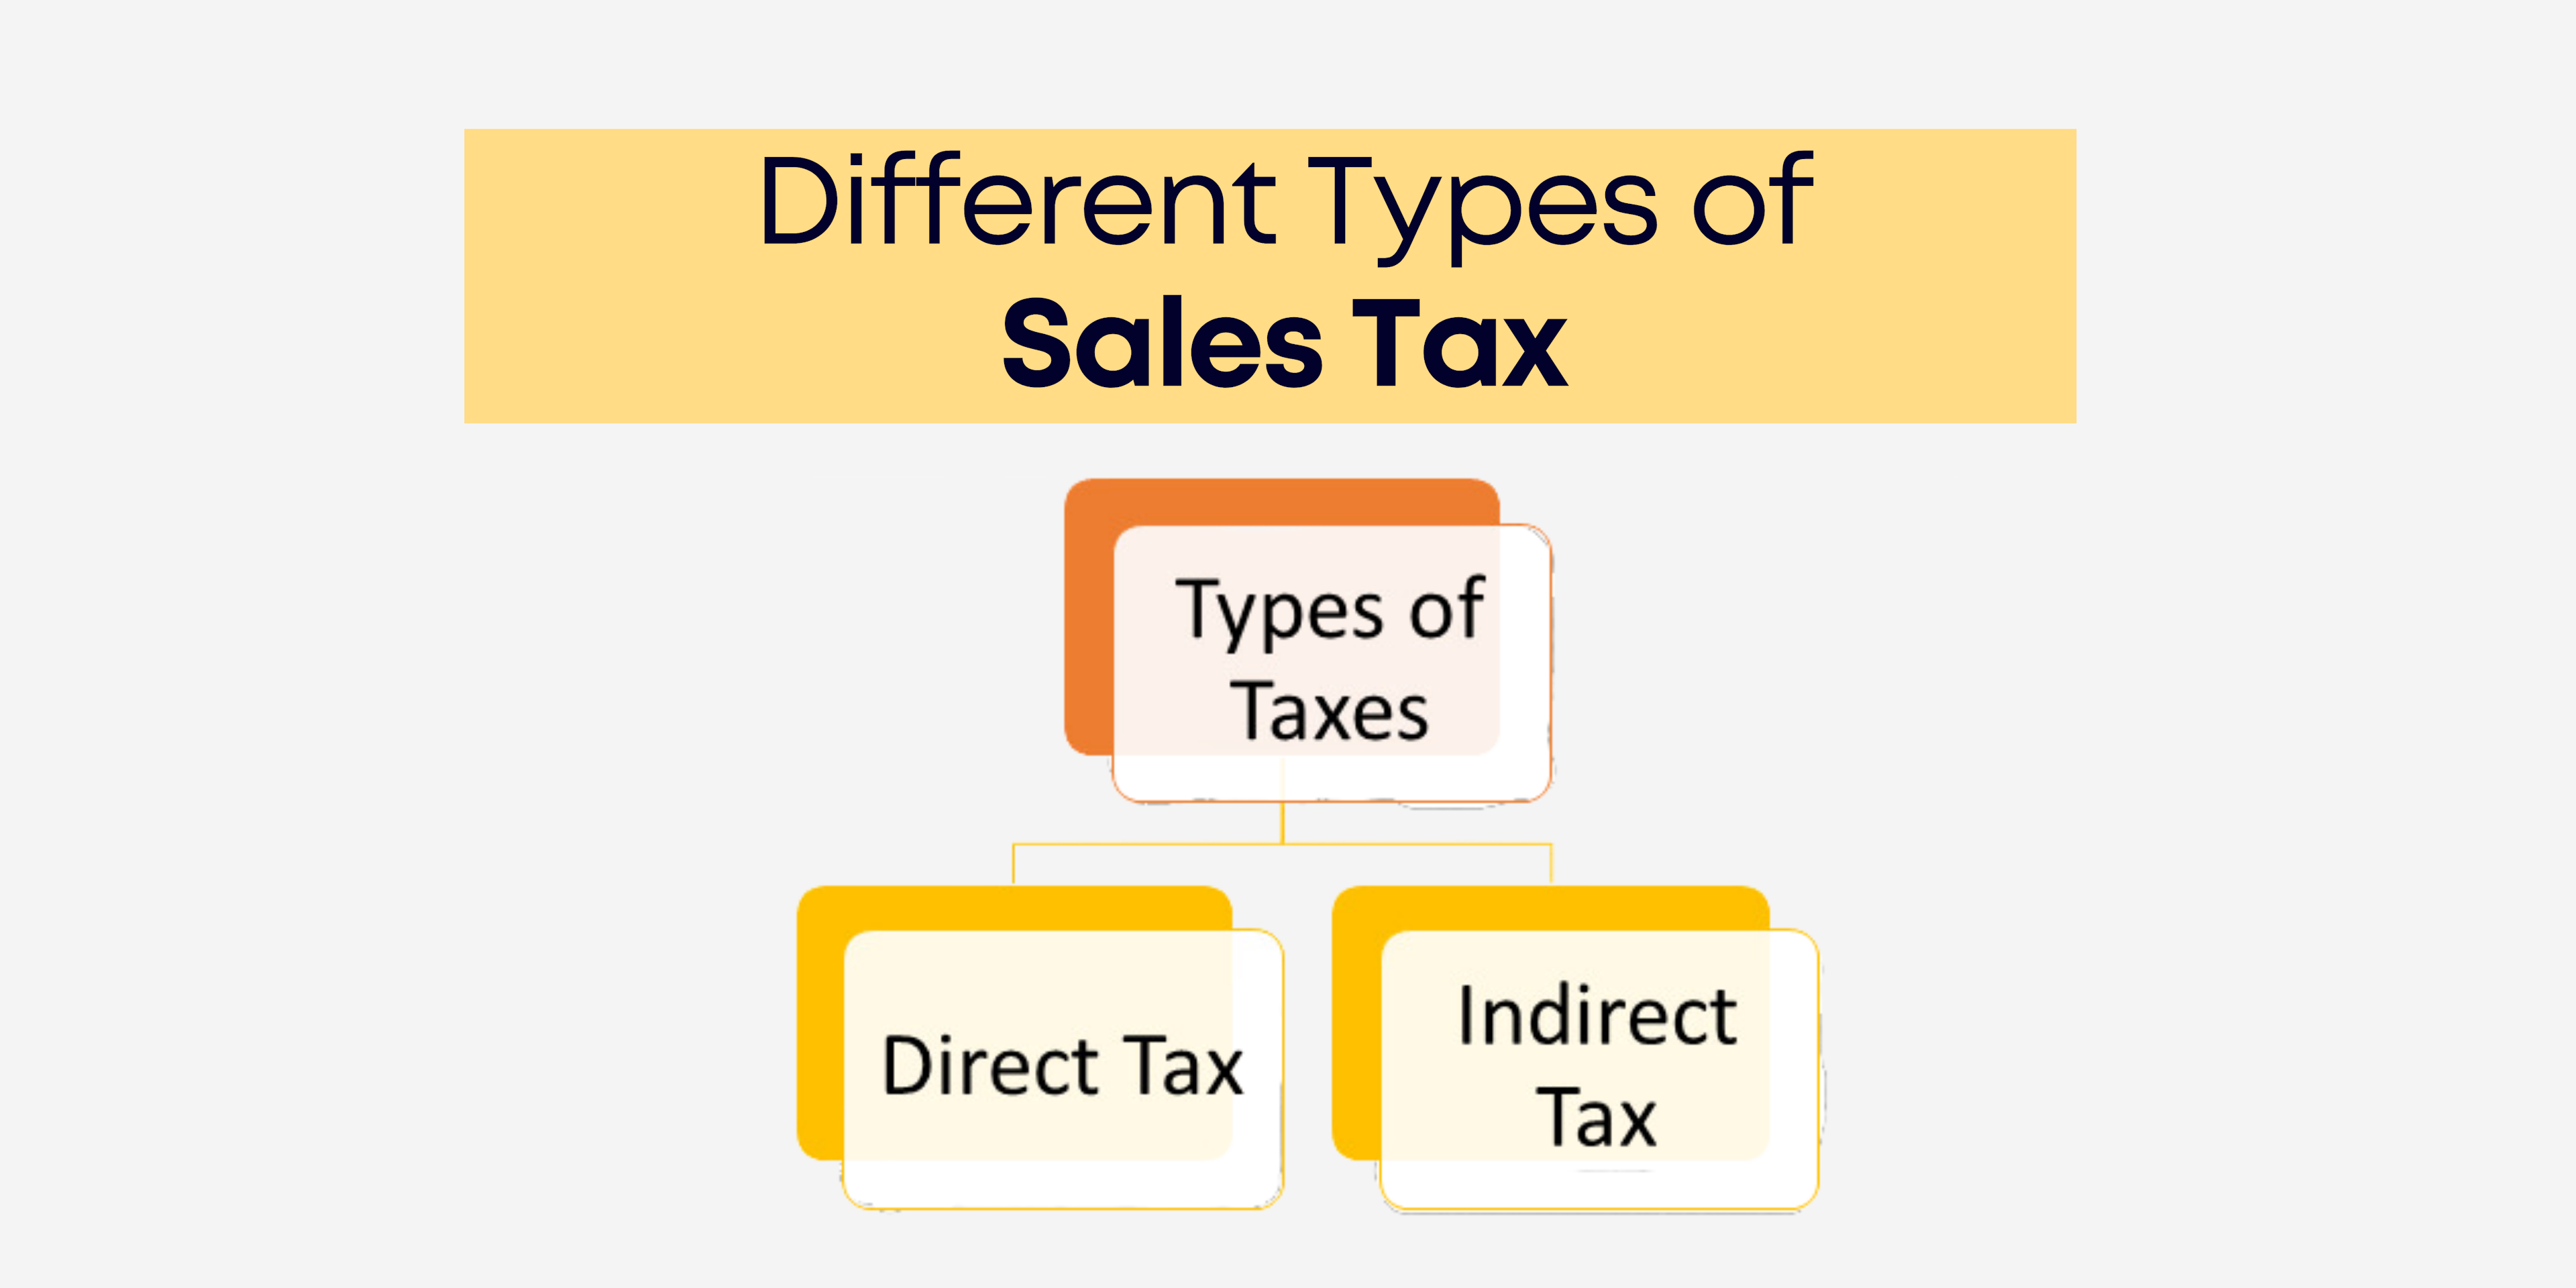 Different Types of Sales Tax